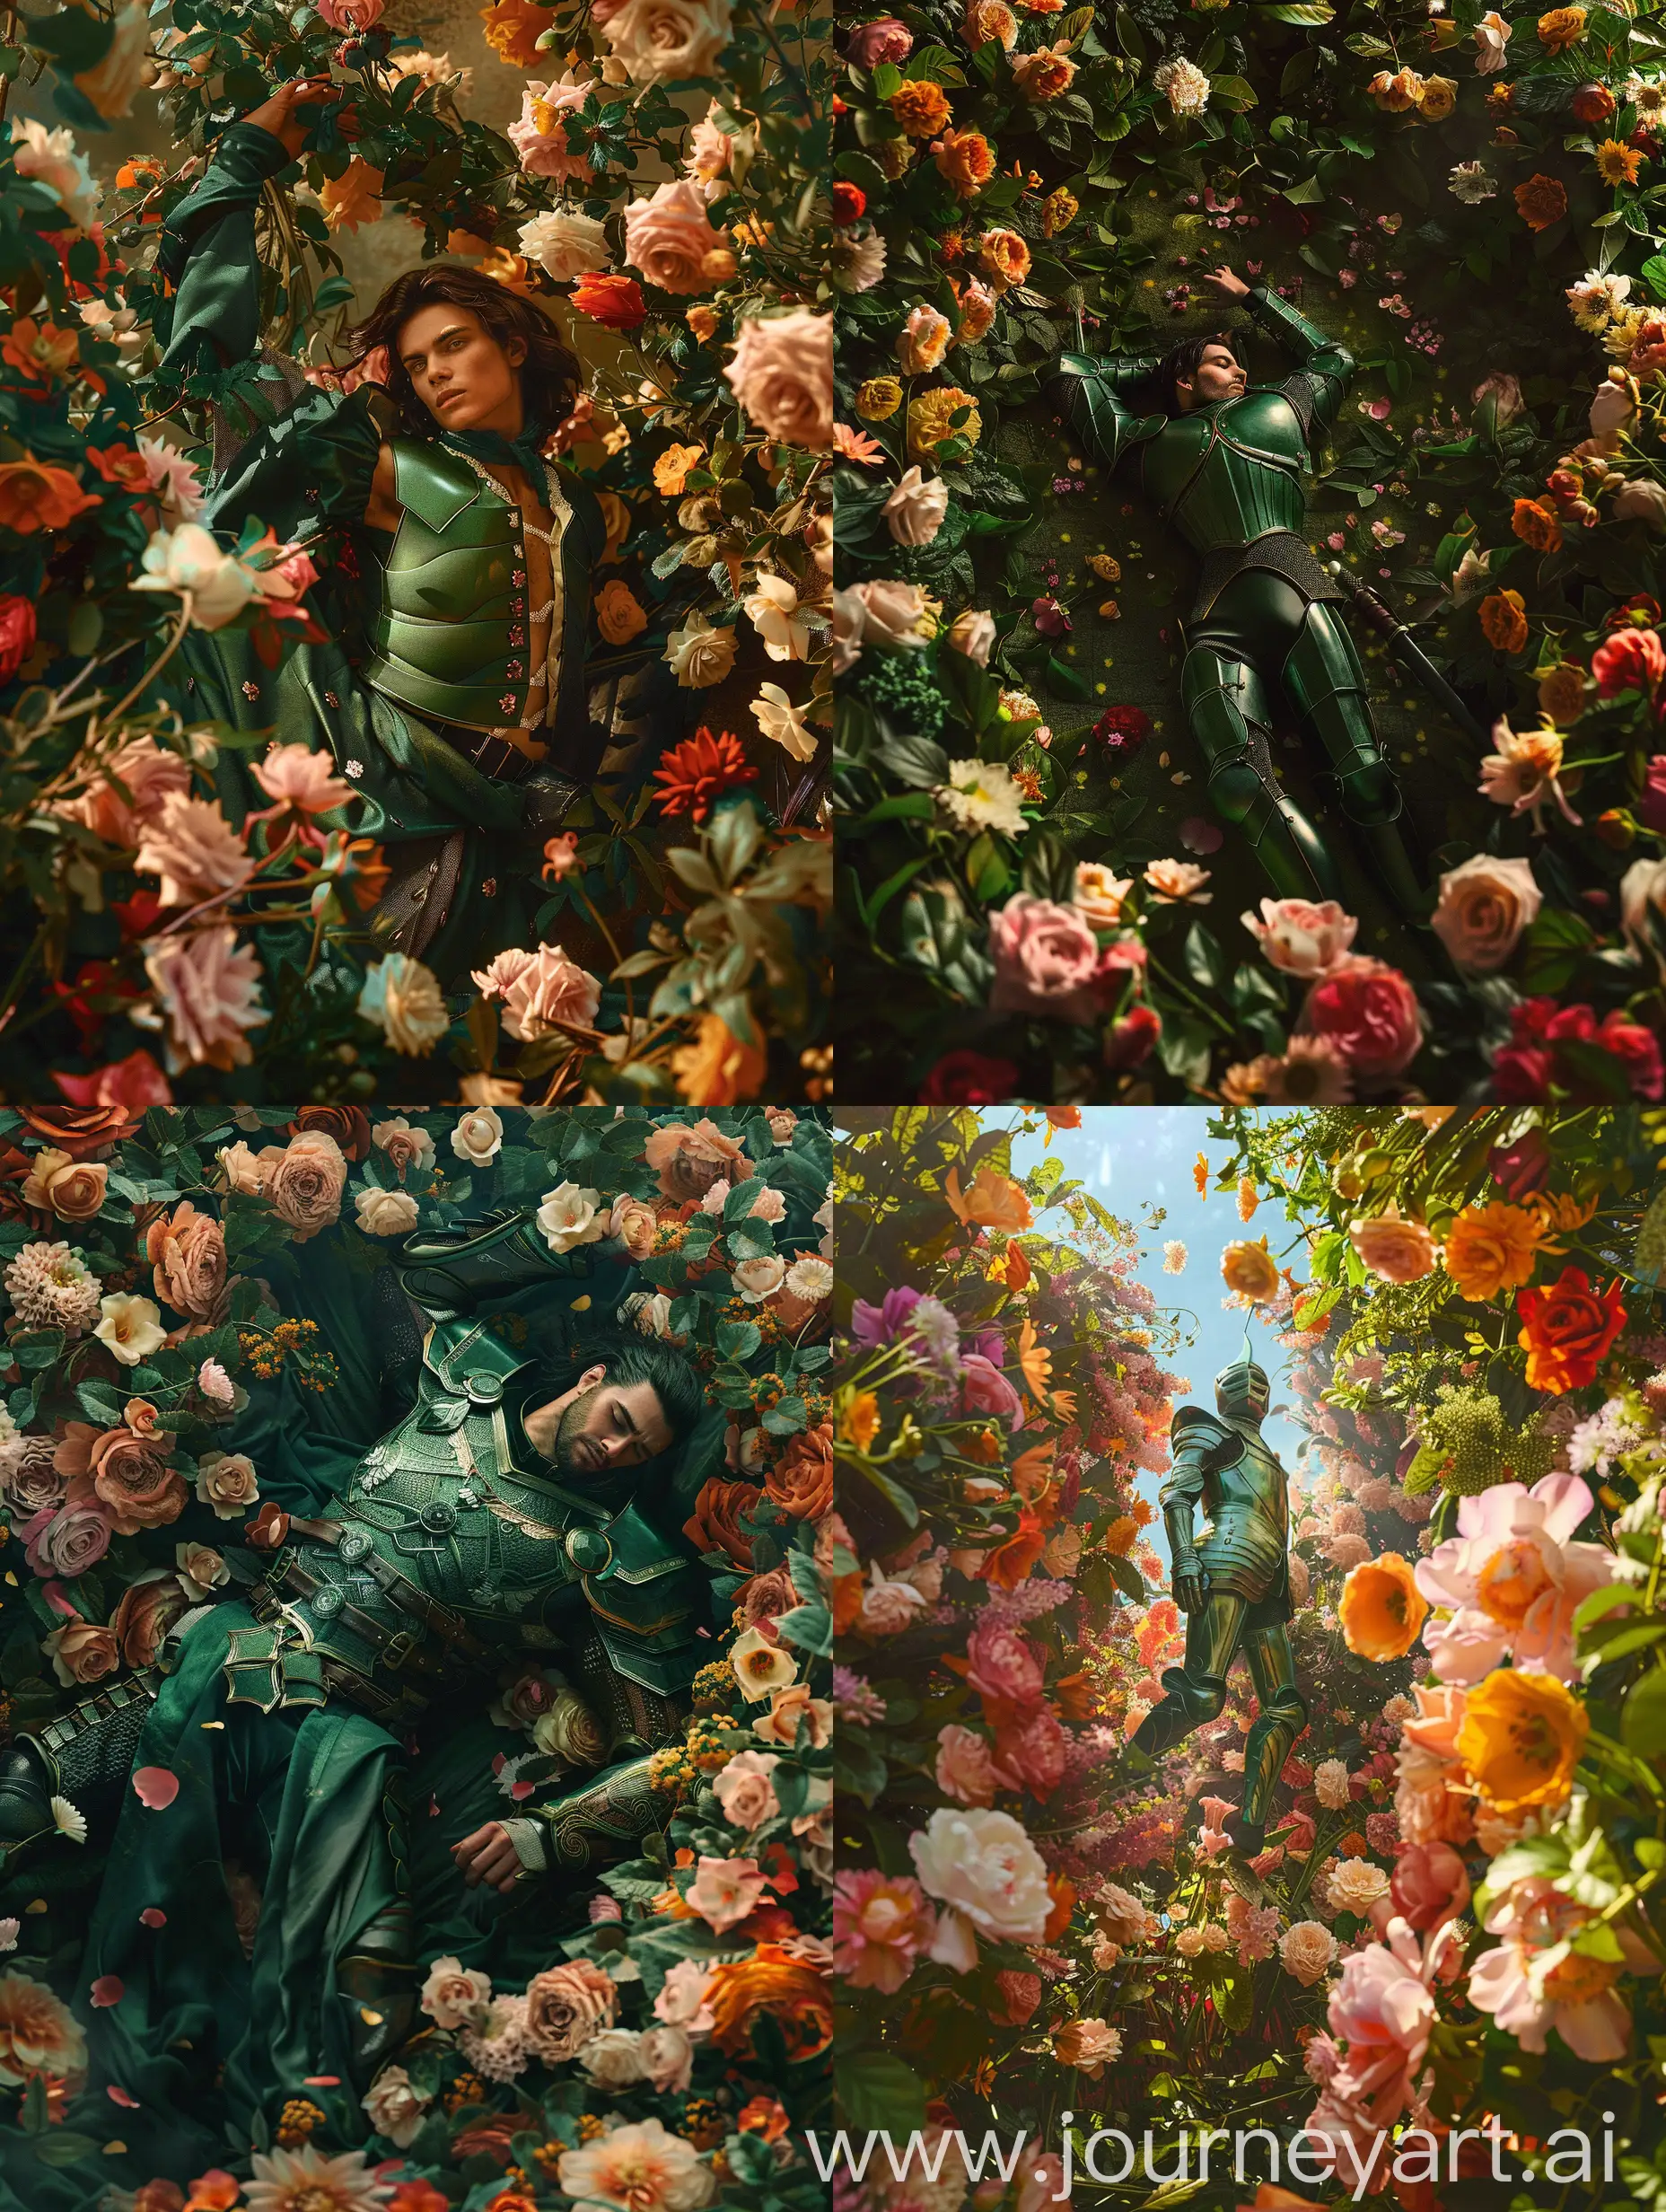 A man in green armor is standing on his back surrounded by beautiful flowers